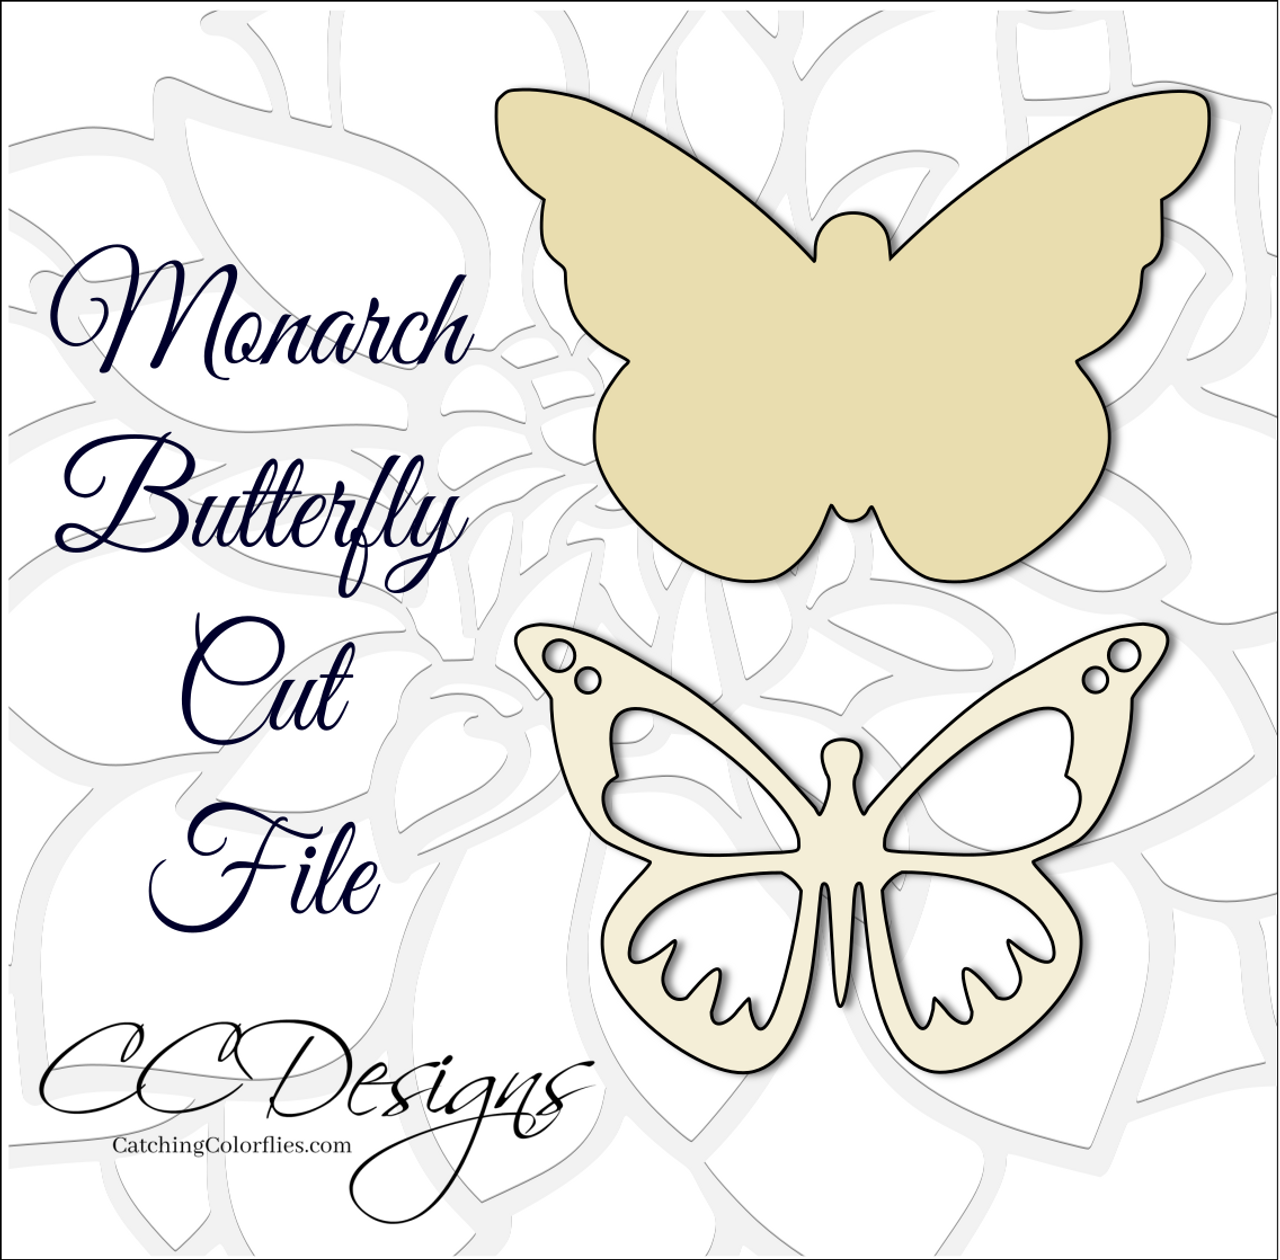 Monarch Butterfly SVG Cut File and PDF Template - Catching ...